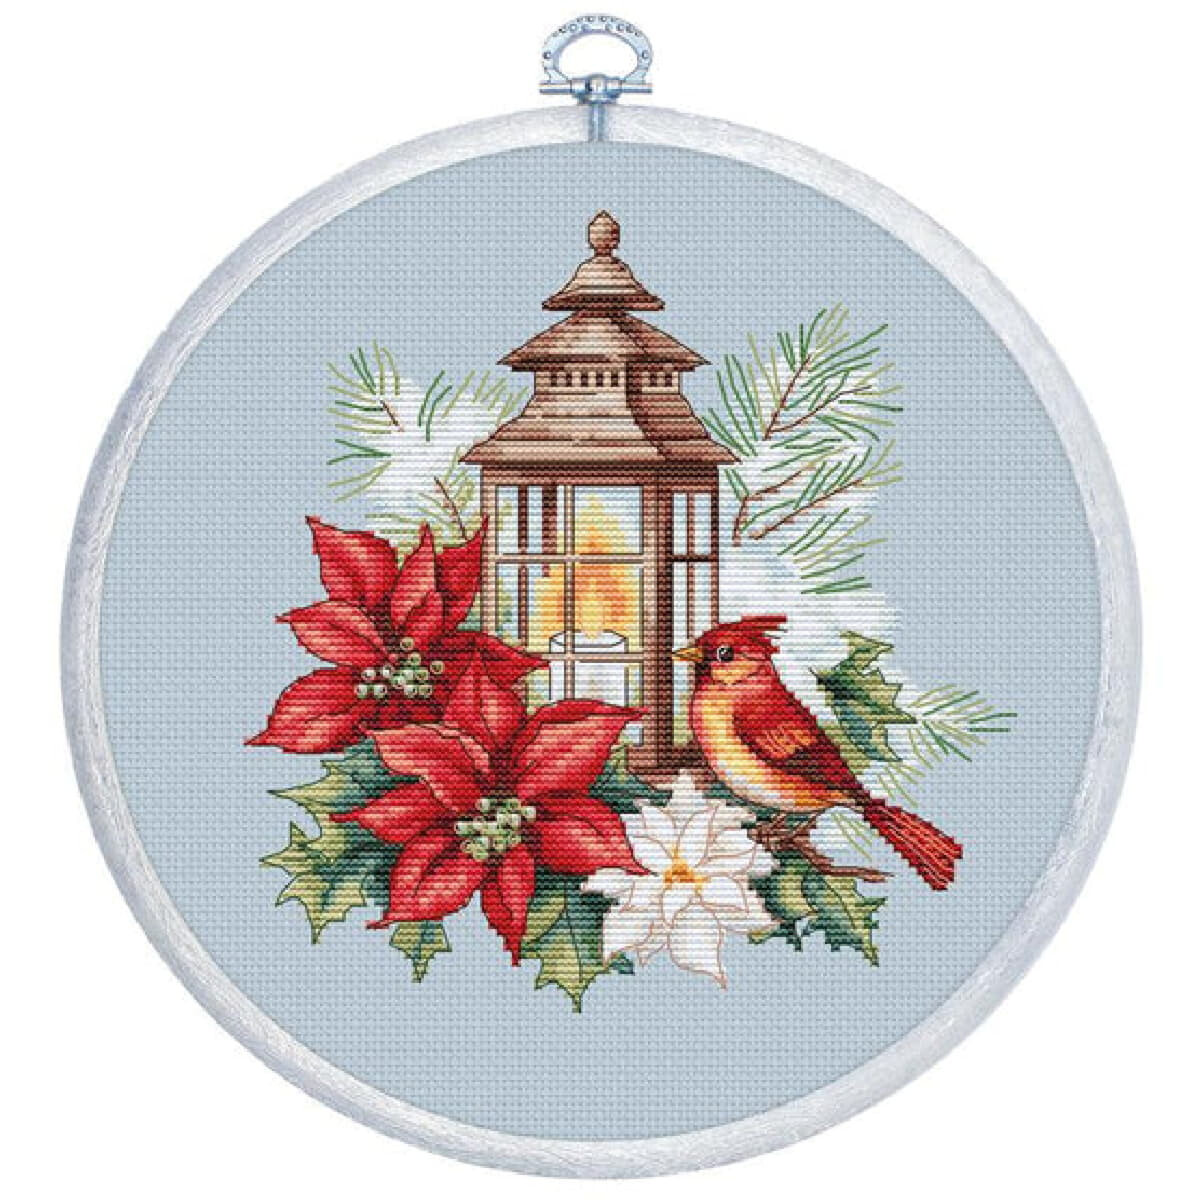 A cross-stitch pattern in a round frame shows a brown...